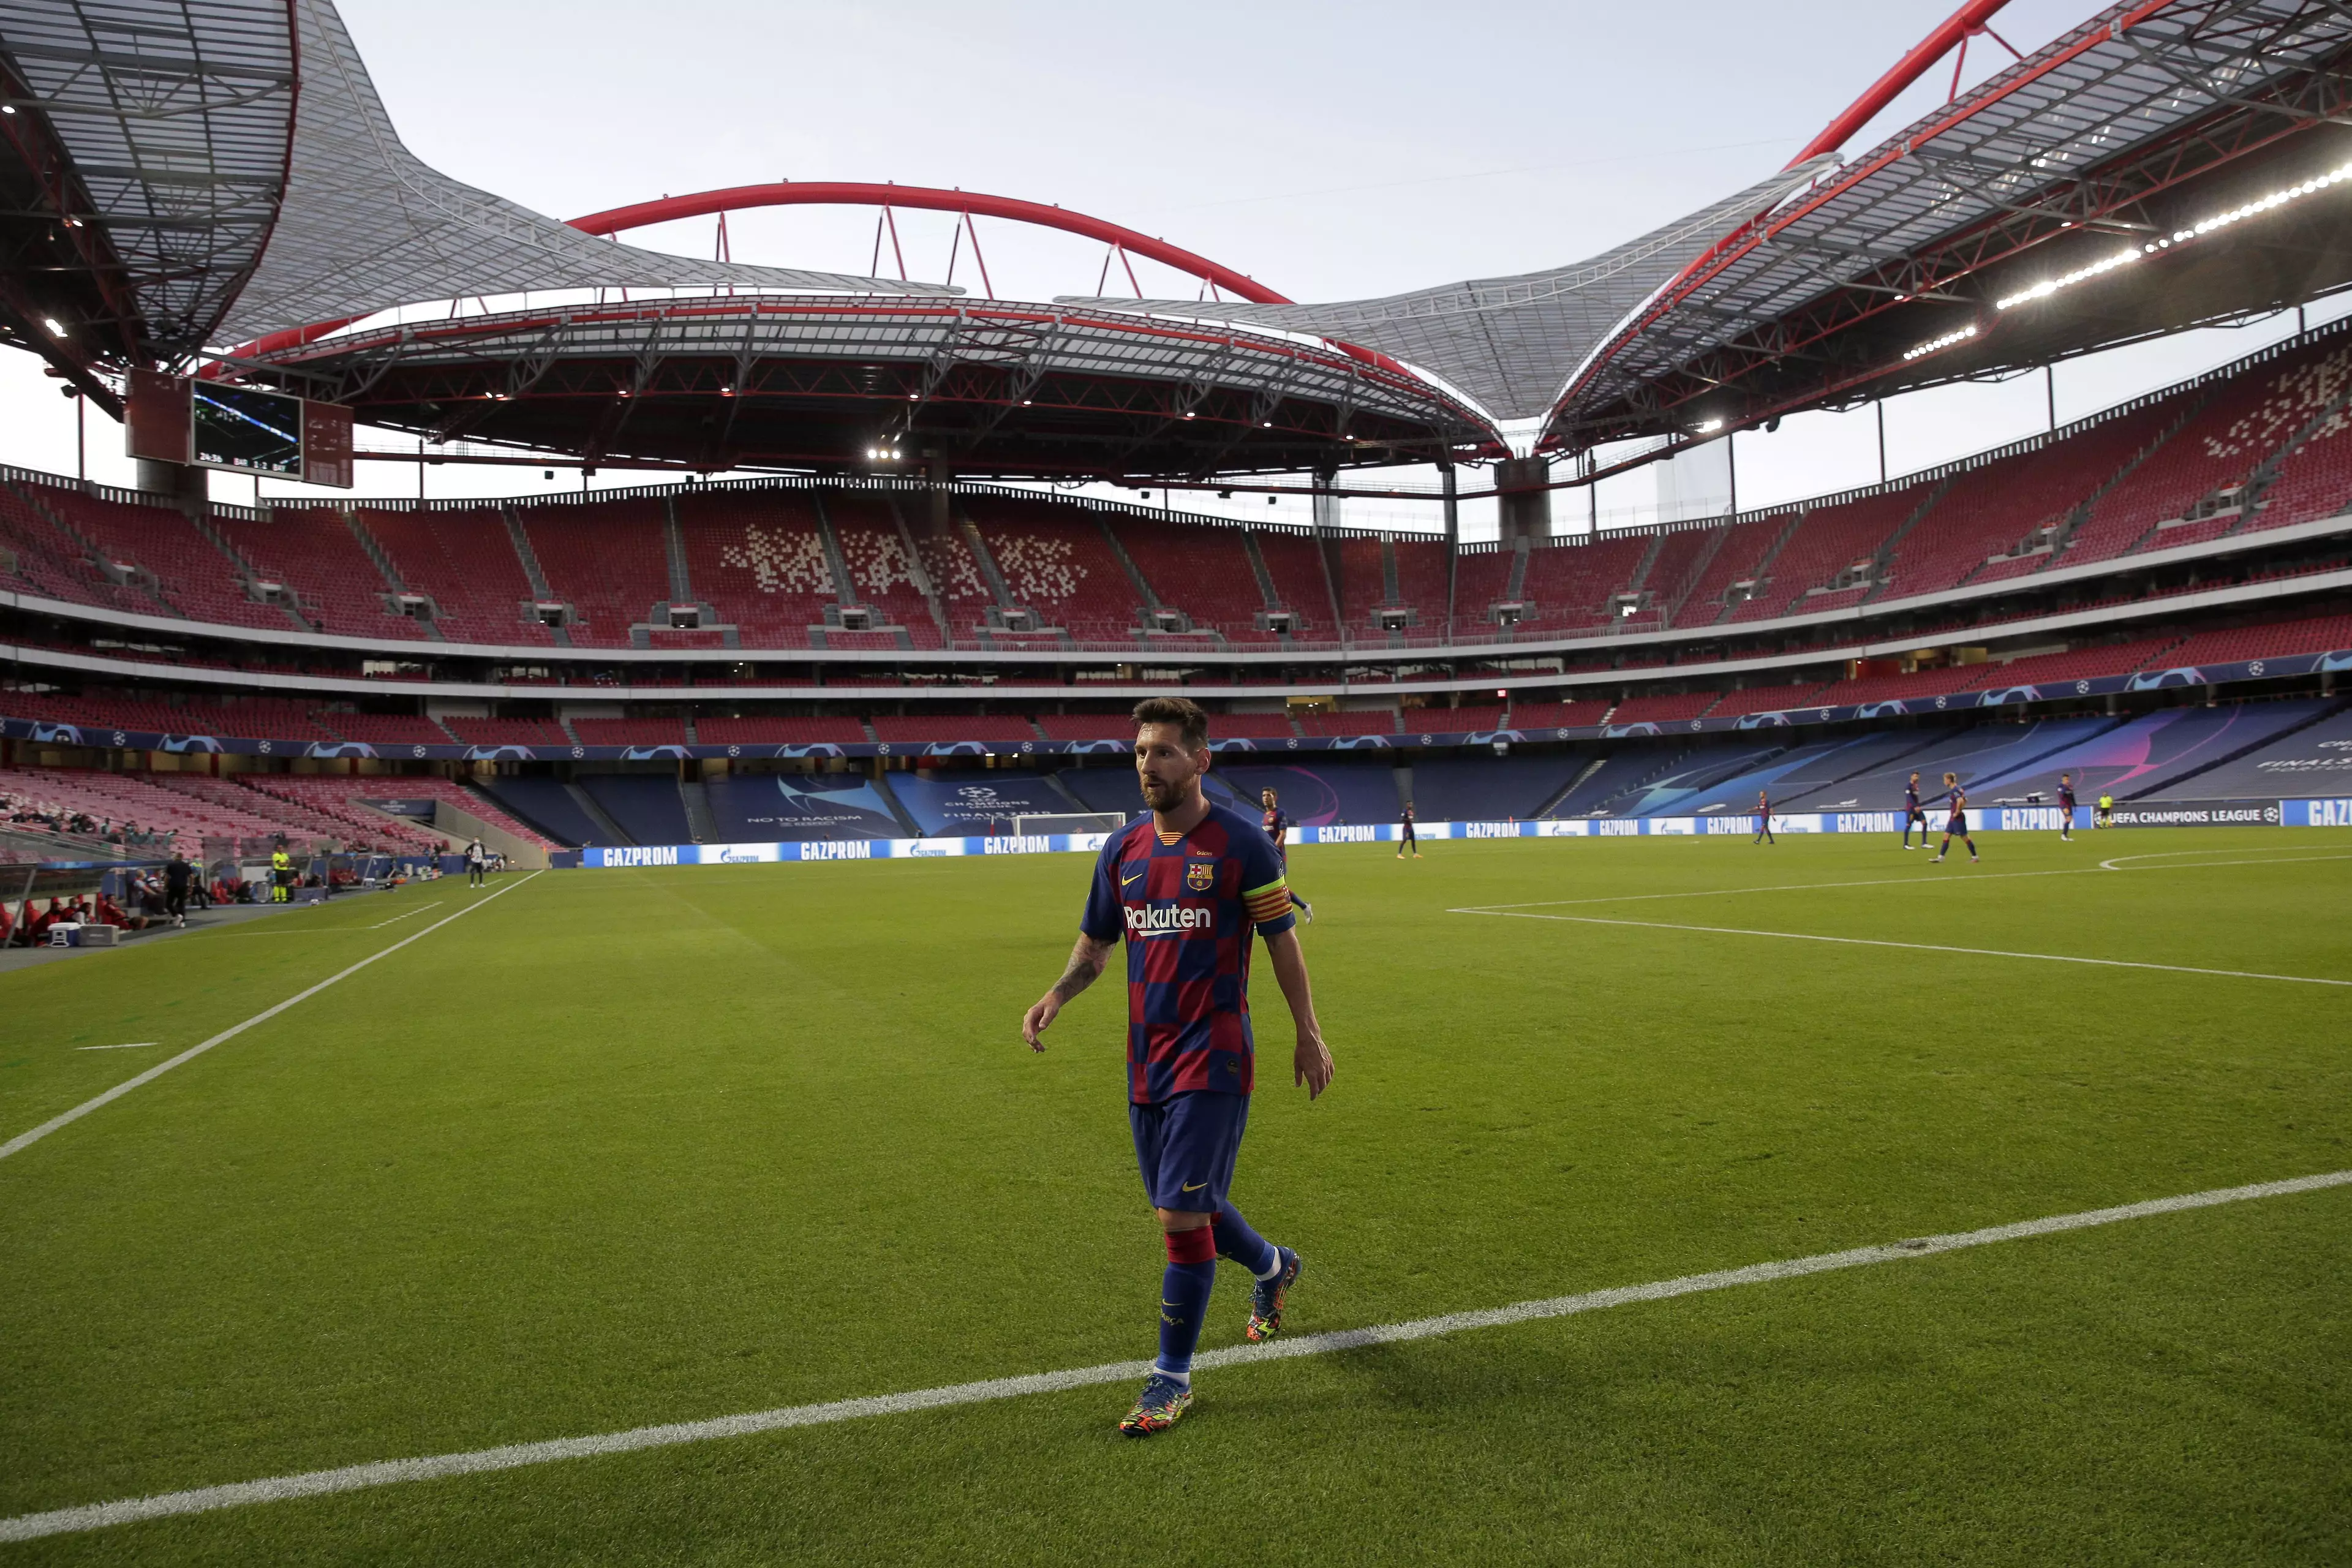 Messi's last game as a Barcelona player looks set to be the 8-2 embarrassment against Bayern Munich. Image: PA Images